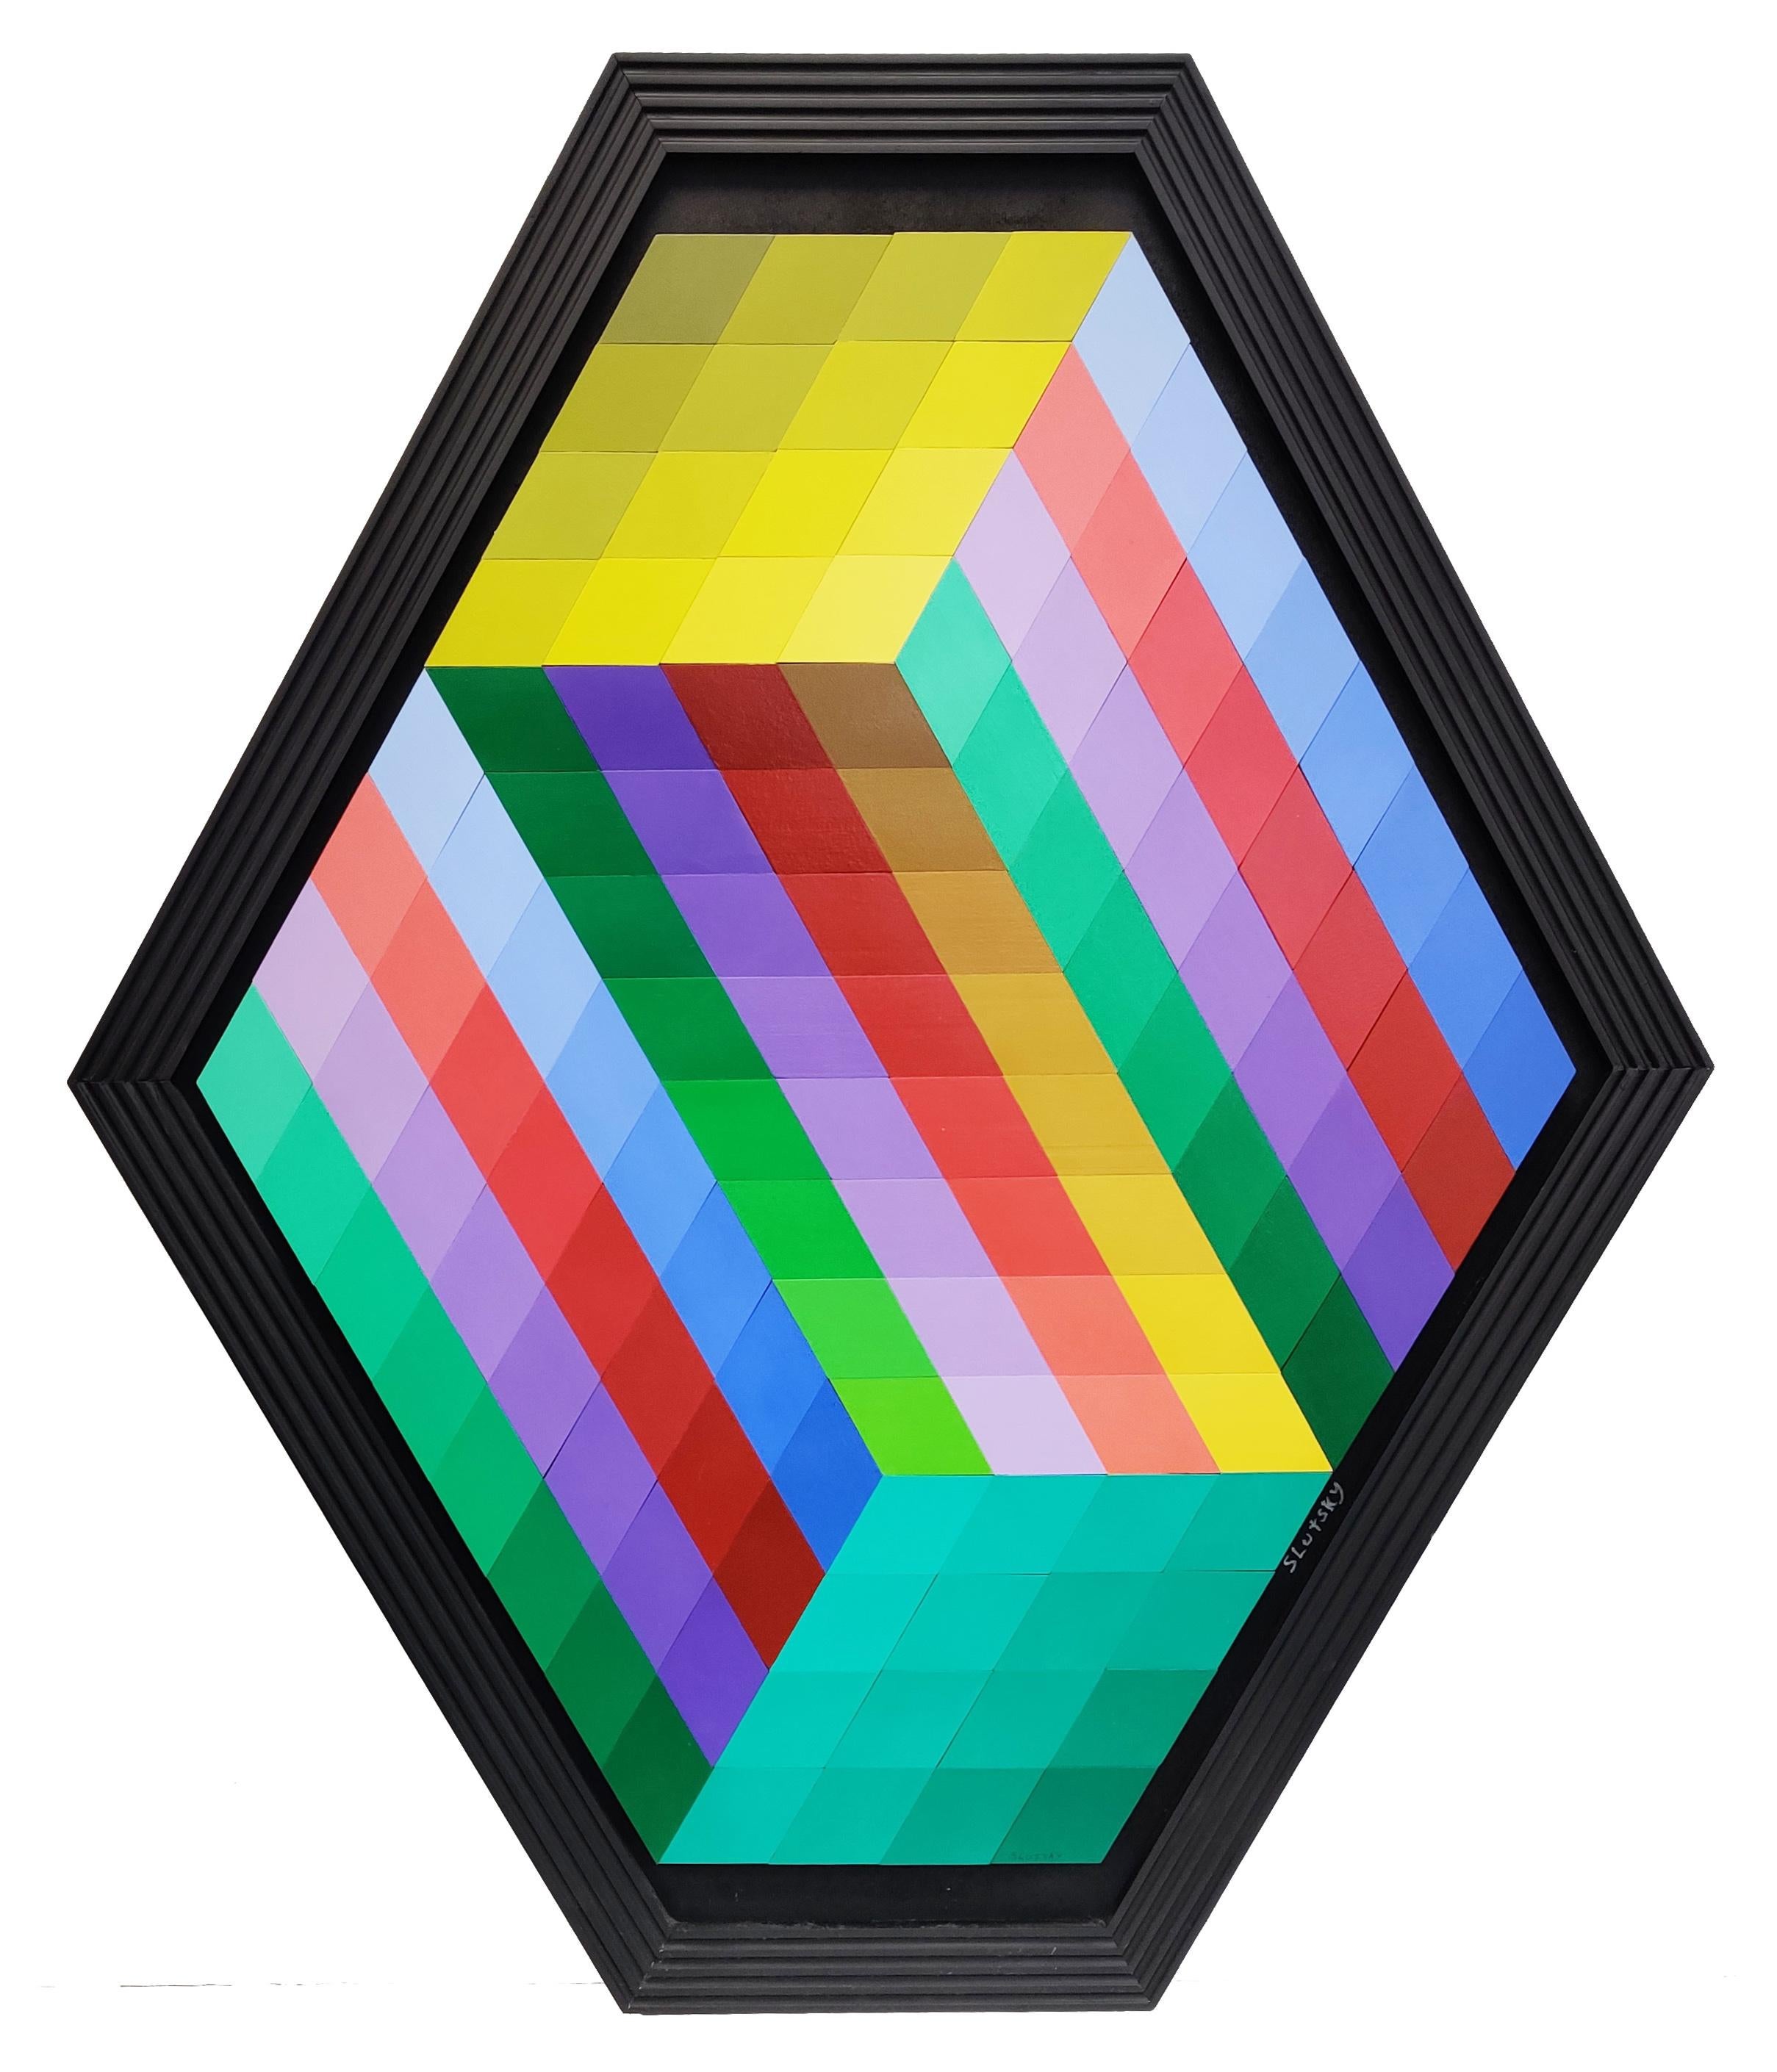 HEXAGON (DIMENSIONAL PIECES OF WOOD WITH MAGNETS) - Mixed Media Art by Stan Slutsky